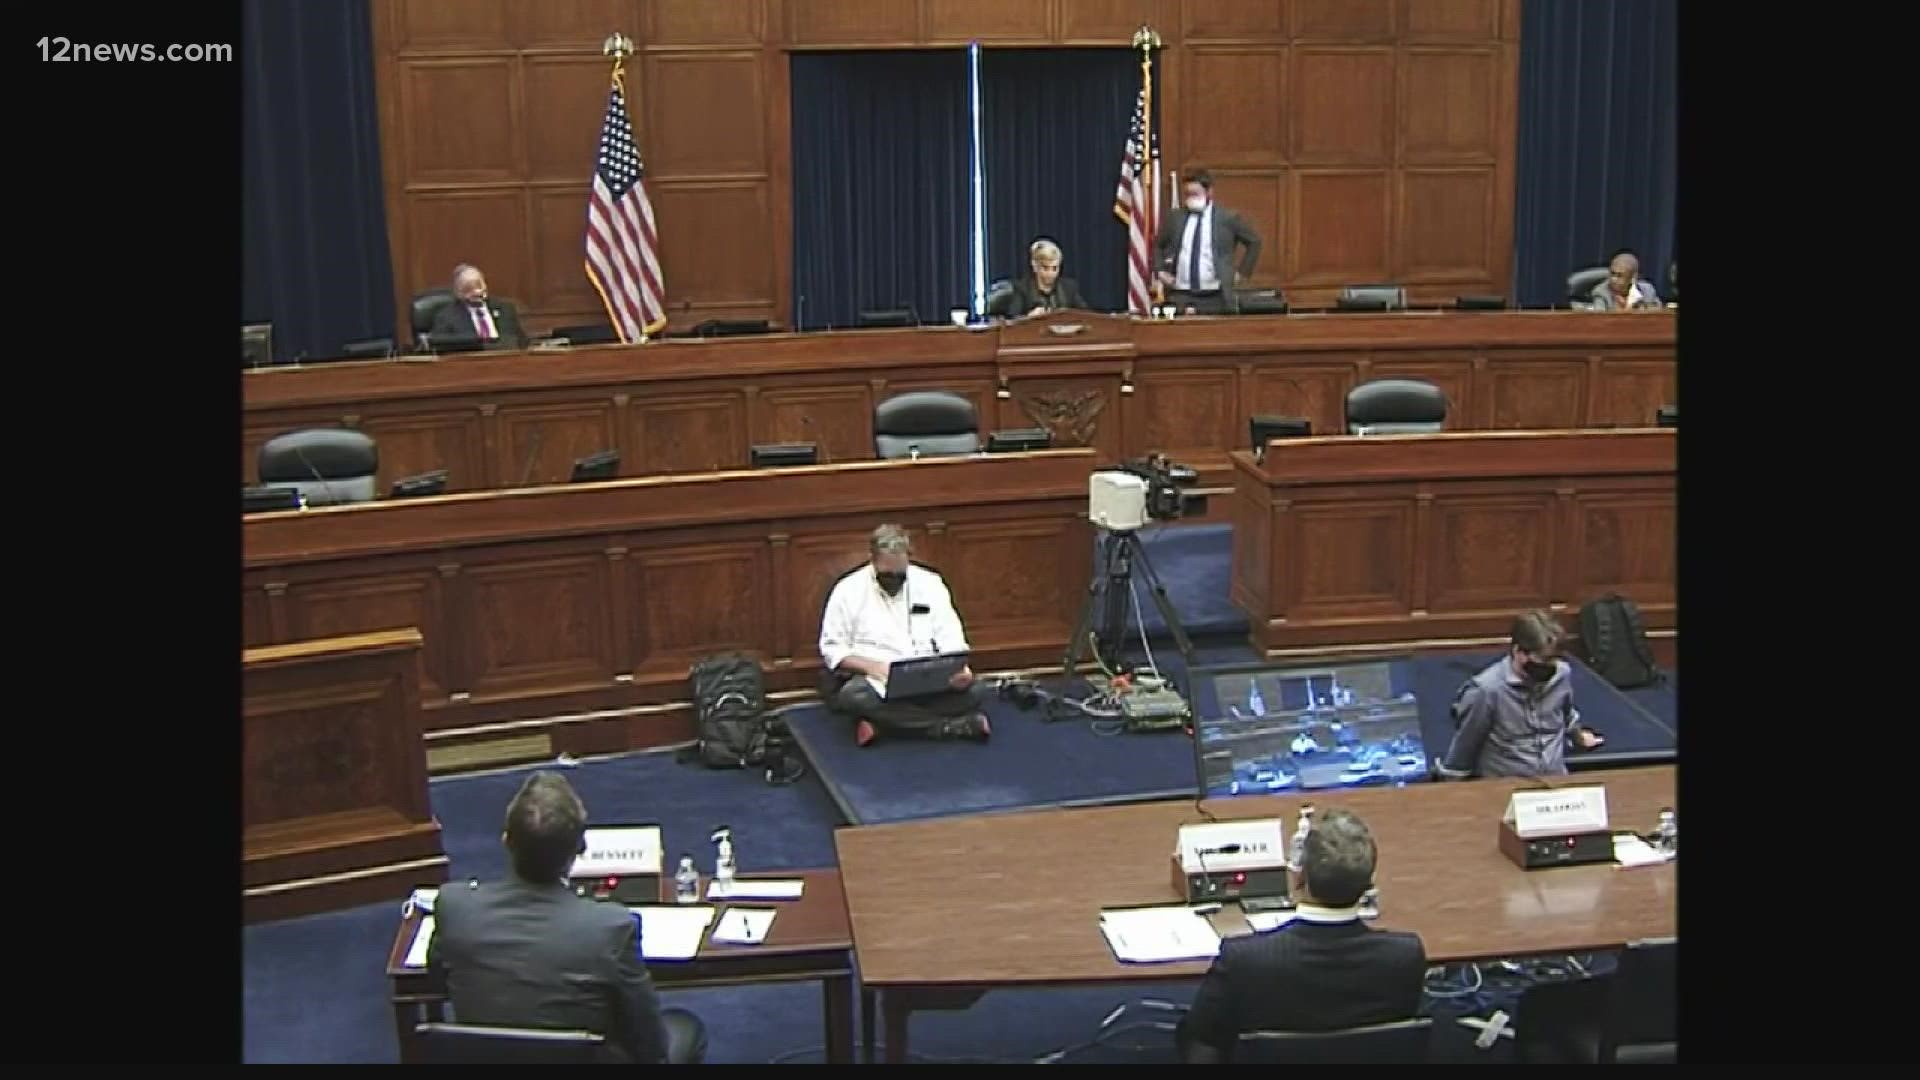 Leaders of the Republican-led election audit did not show up to a House Oversight Committee hearing about their actions. The CEO of Cyber Ninjas declined to appear.